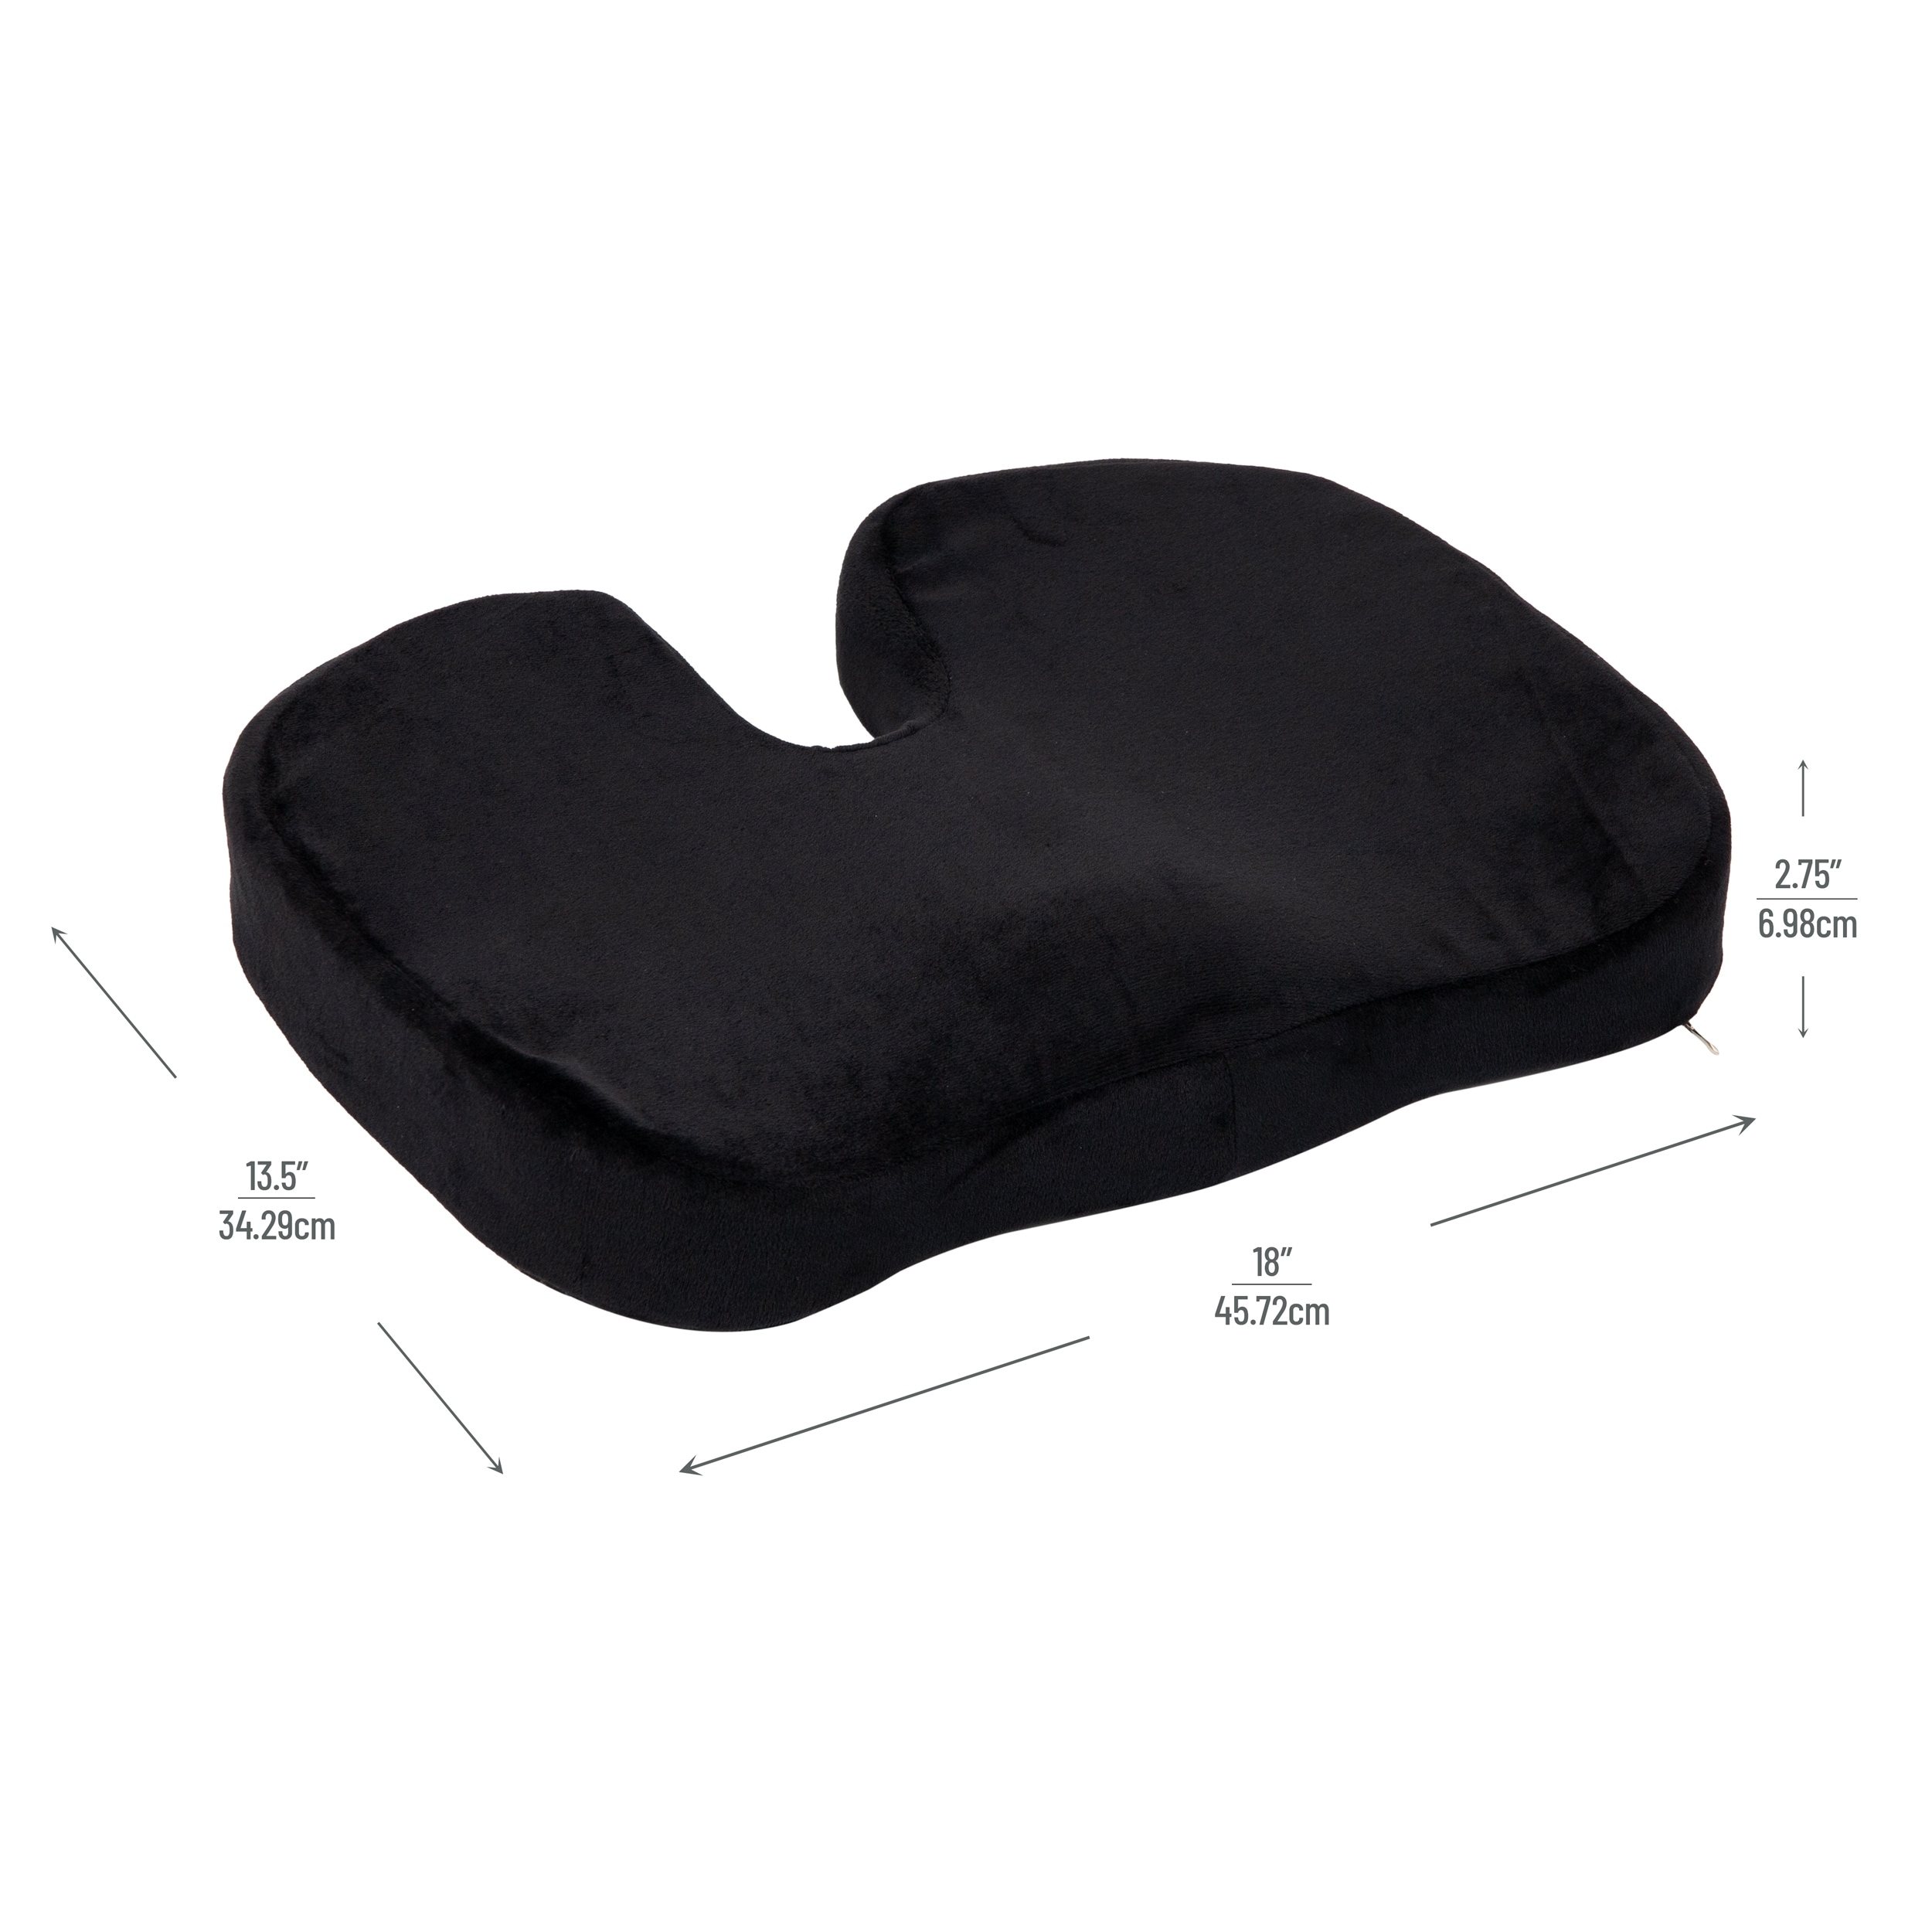 https://ak1.ostkcdn.com/images/products/is/images/direct/909a167c5532f4650c06a20fdfba1b07dda2e46e/Mind-Reader-Harmony-Collection%2C-Orthopedic-Seat-Cushion%2C-Ergonomic-Design.jpg